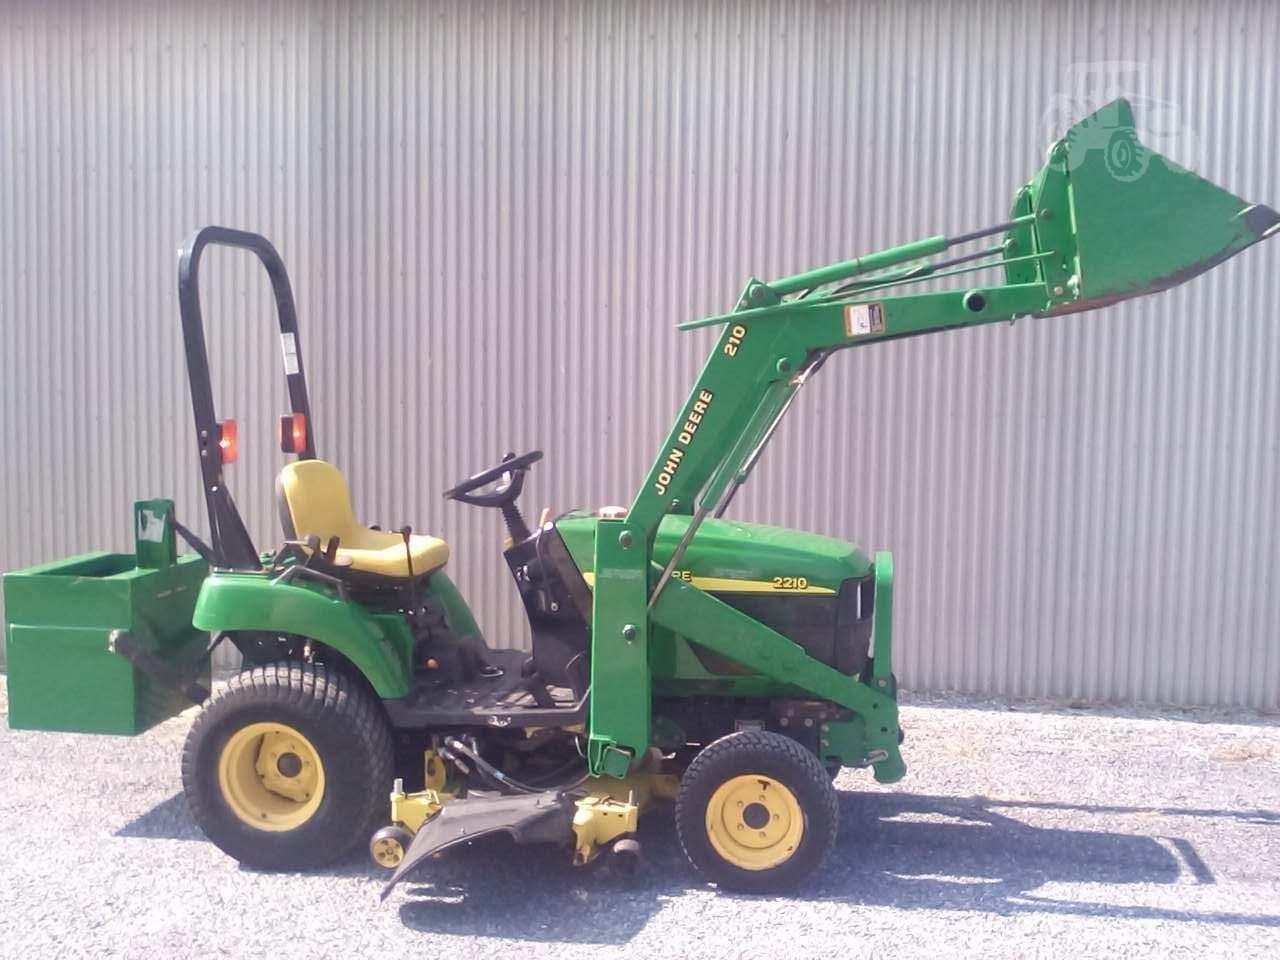 John Deere 2210 For Sale 23 Listings Tractorhouse Com Page 1 Of 1